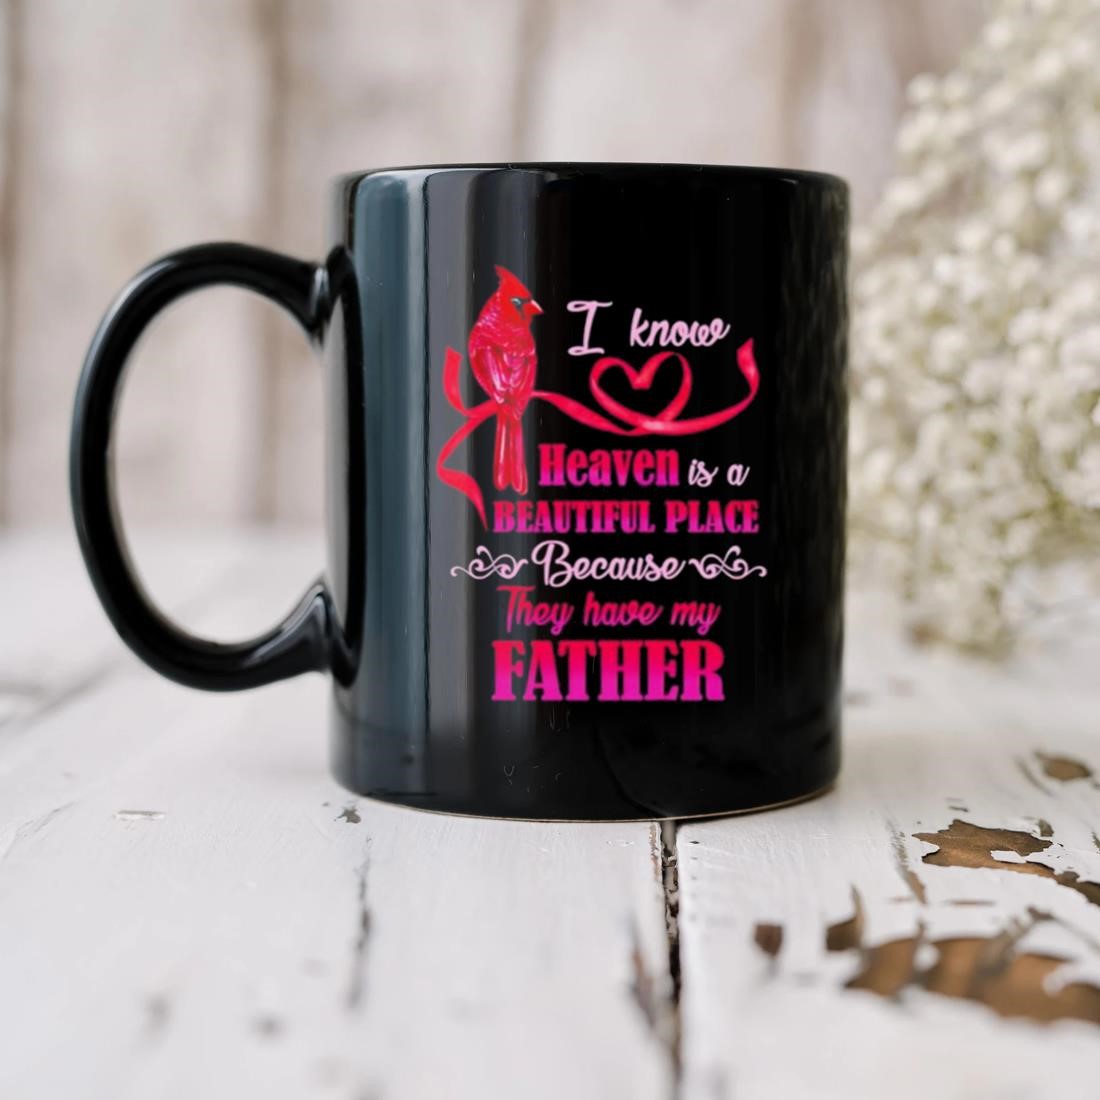 I Know Heaven Is A Beautiful Place Because They Have My Father Mug biu.jpg